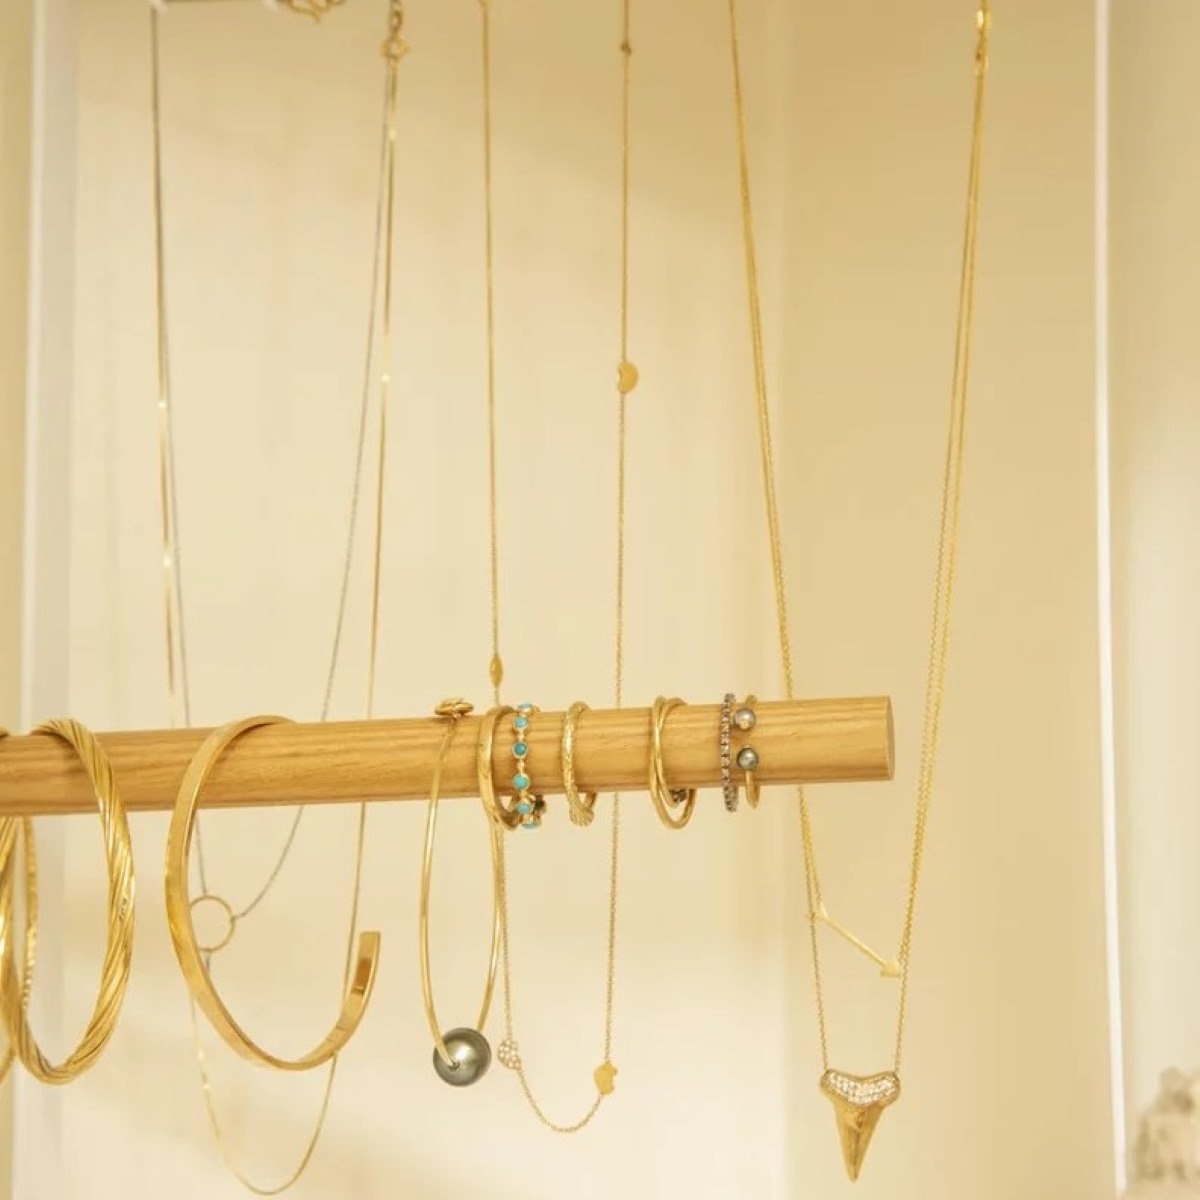 How To Store A Necklace Without Tangling